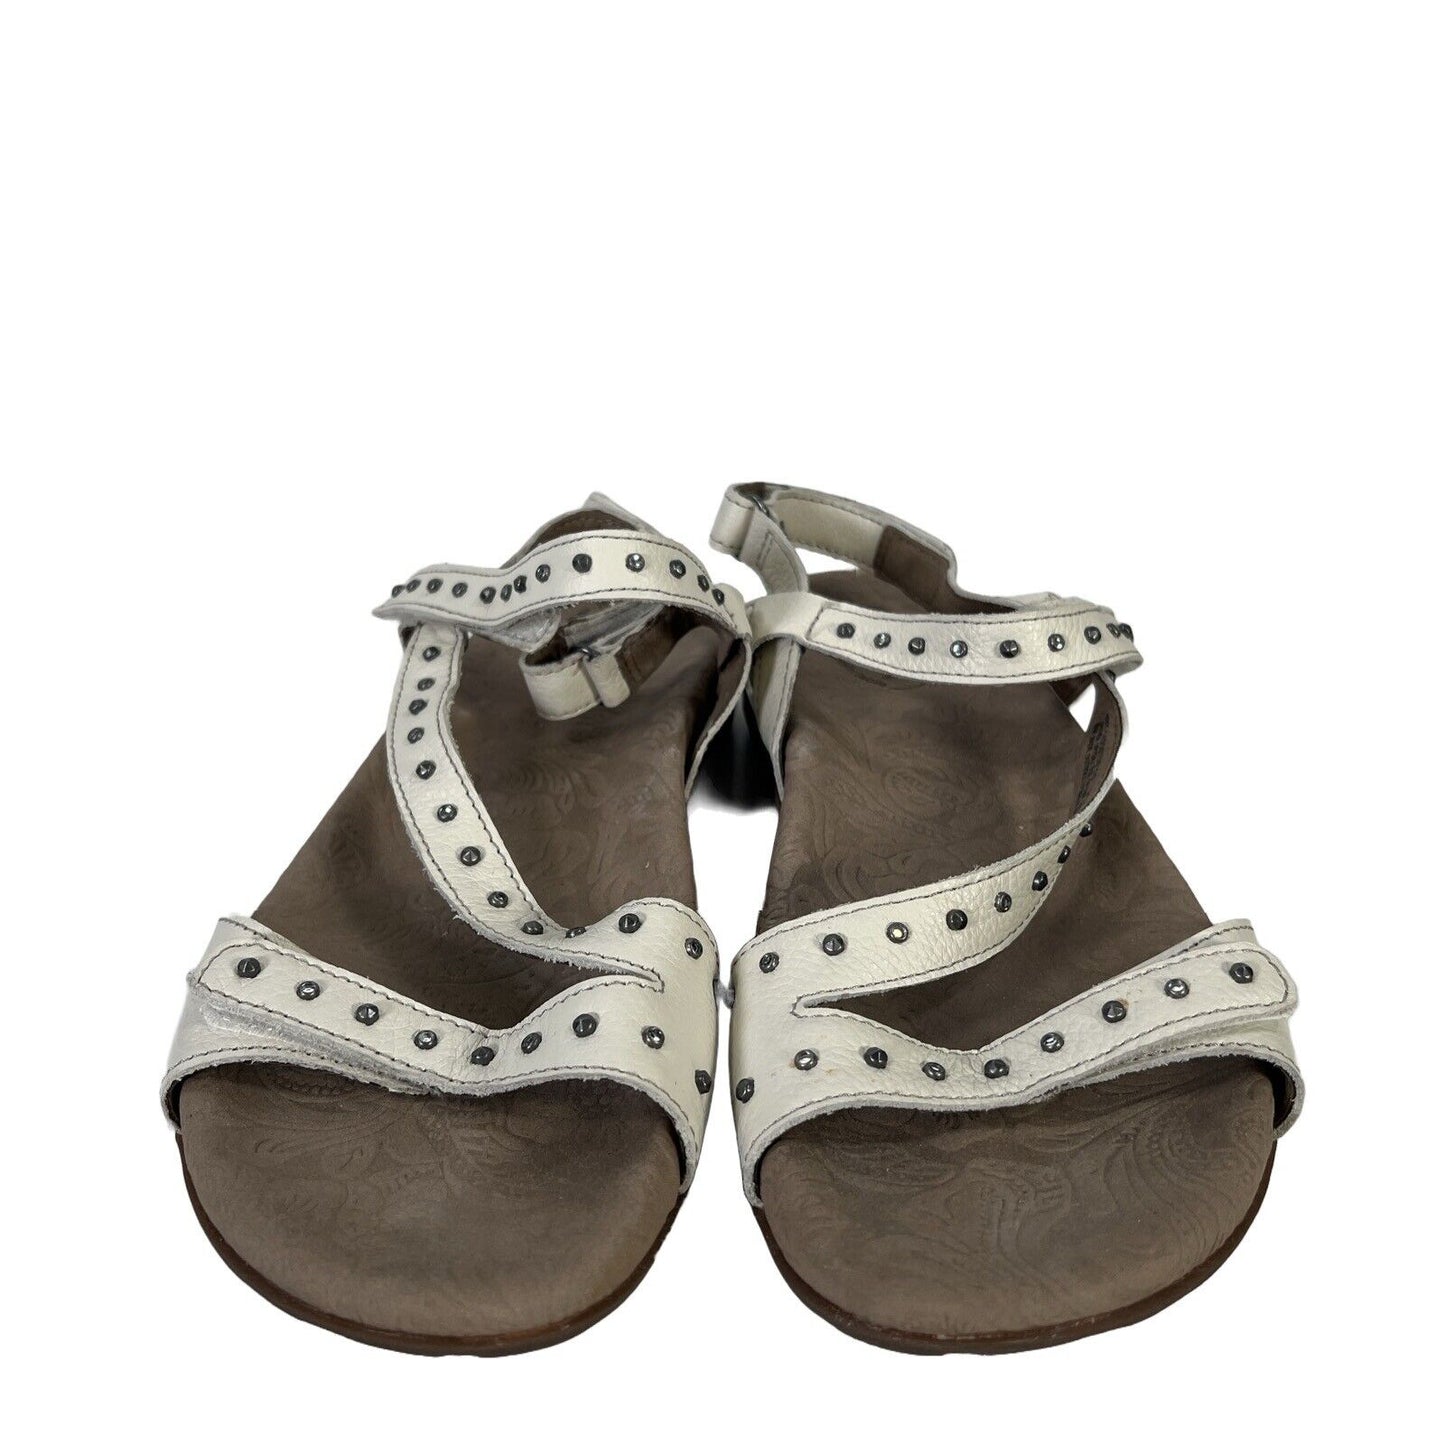 Taos Women's White Studded Leather Ankle Strap Sandals - 10